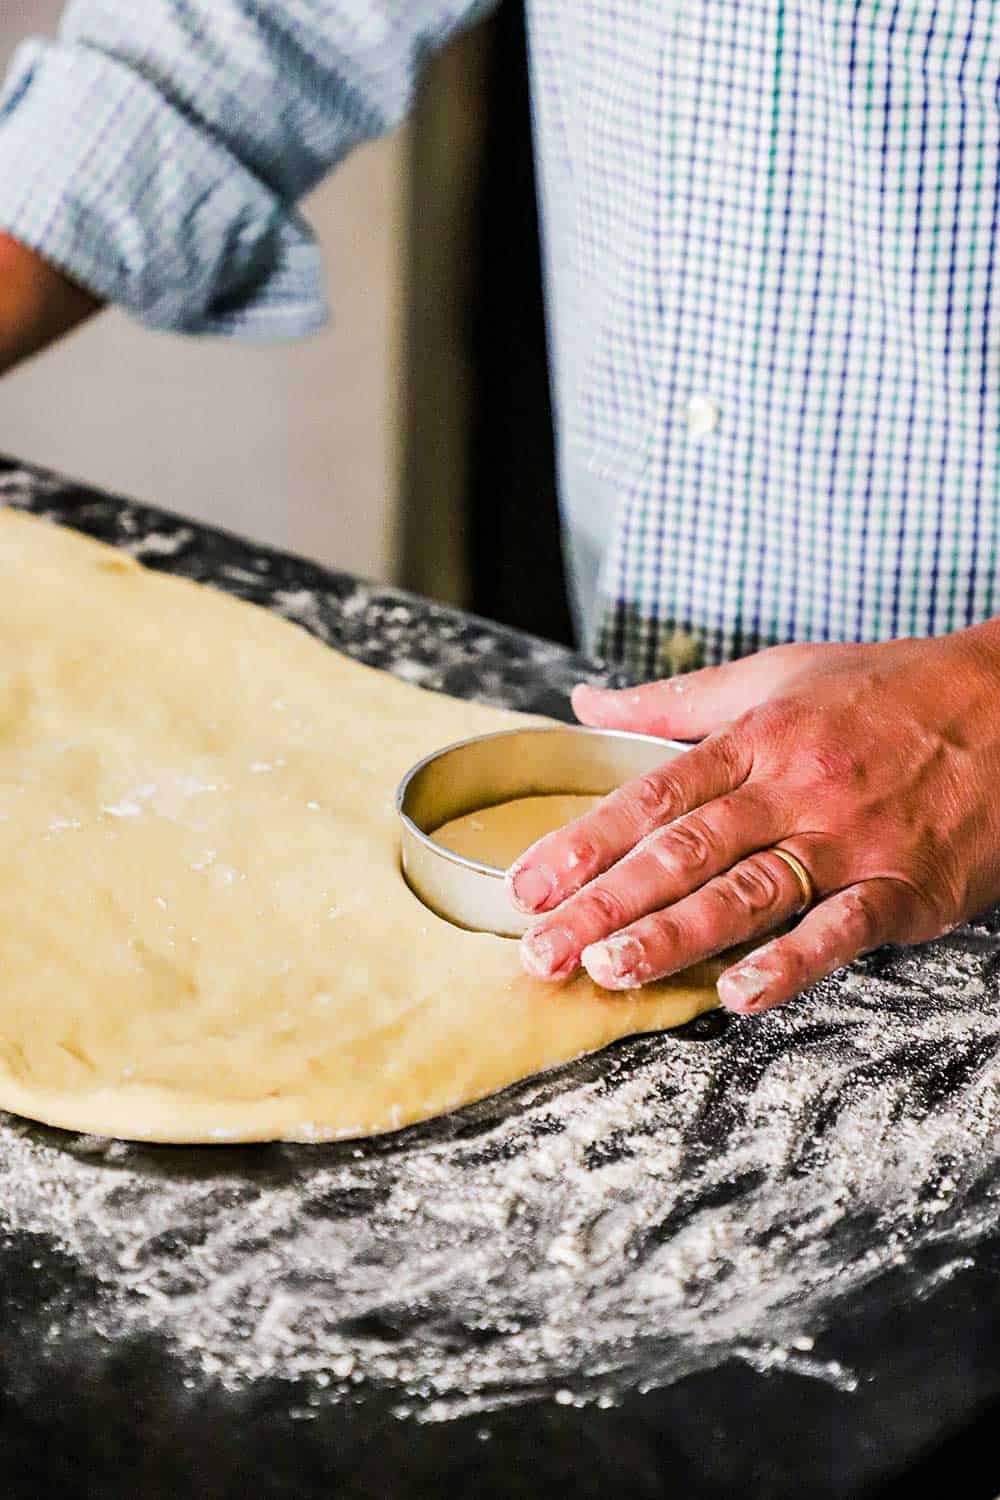 A person using a large circular cookie cutter to cut out rounds from dough that has been rolled out into a large rectangle.